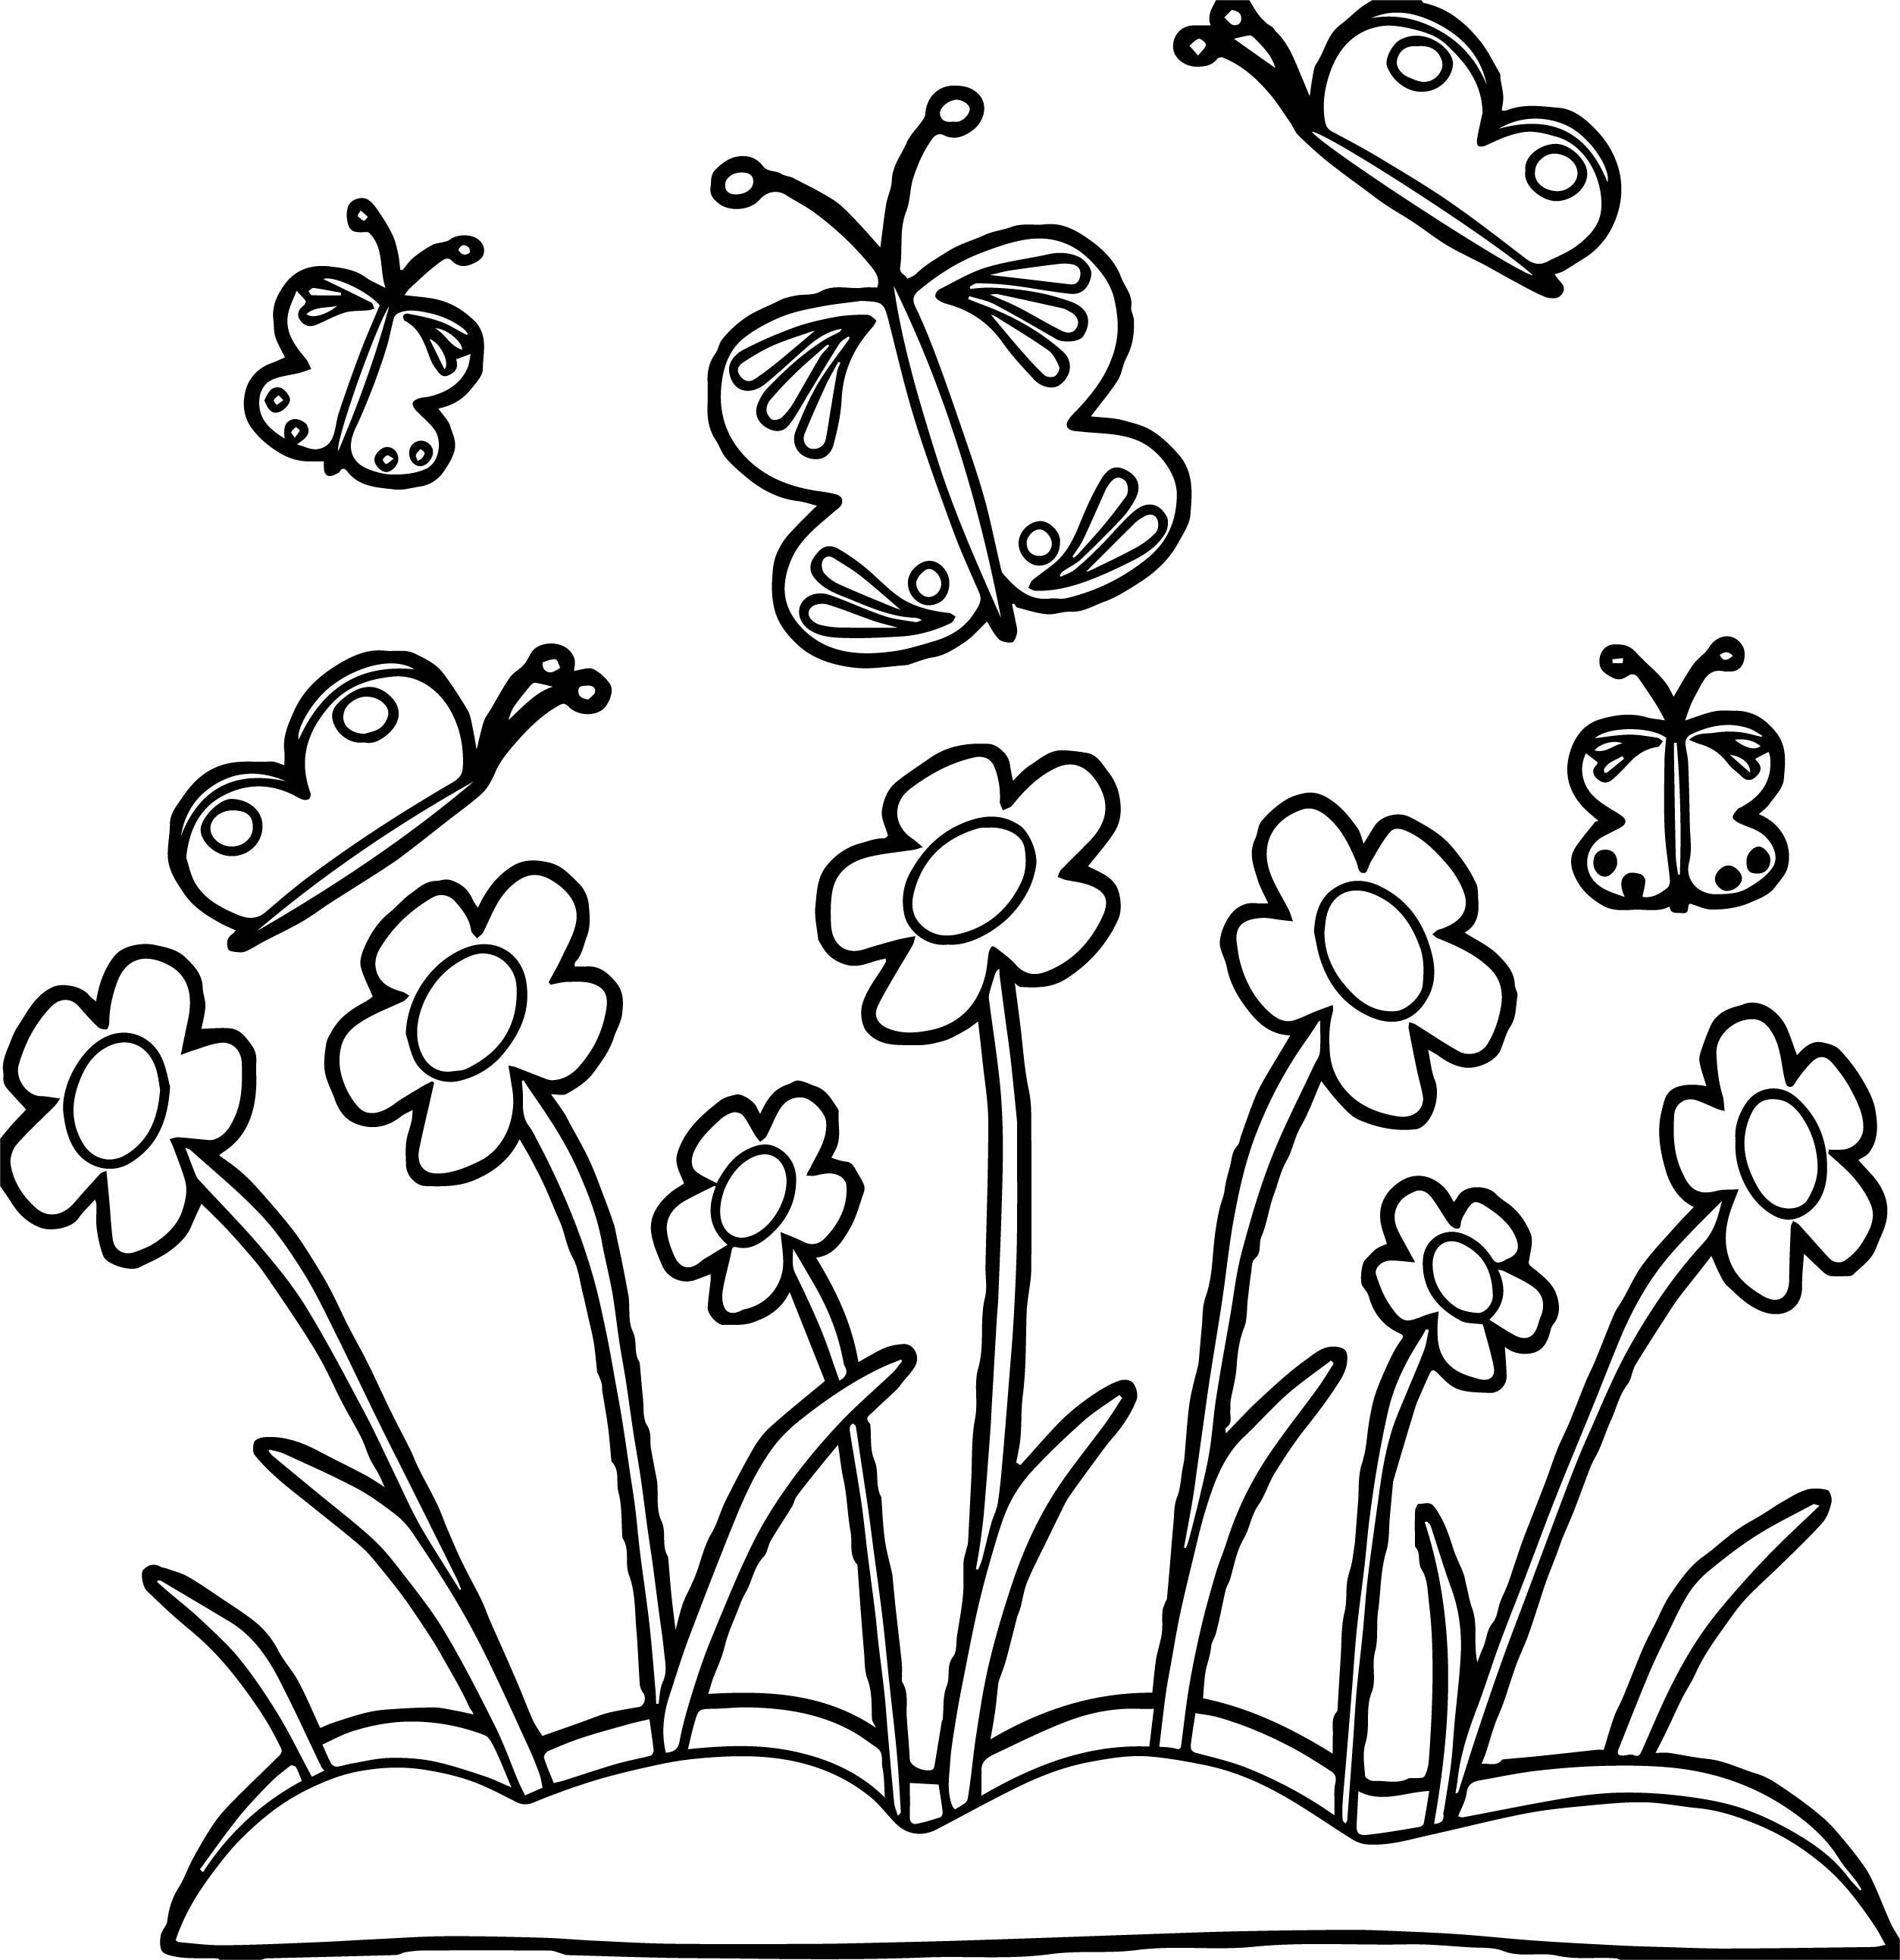 Coloring Page Border at GetColorings.com | Free printable colorings